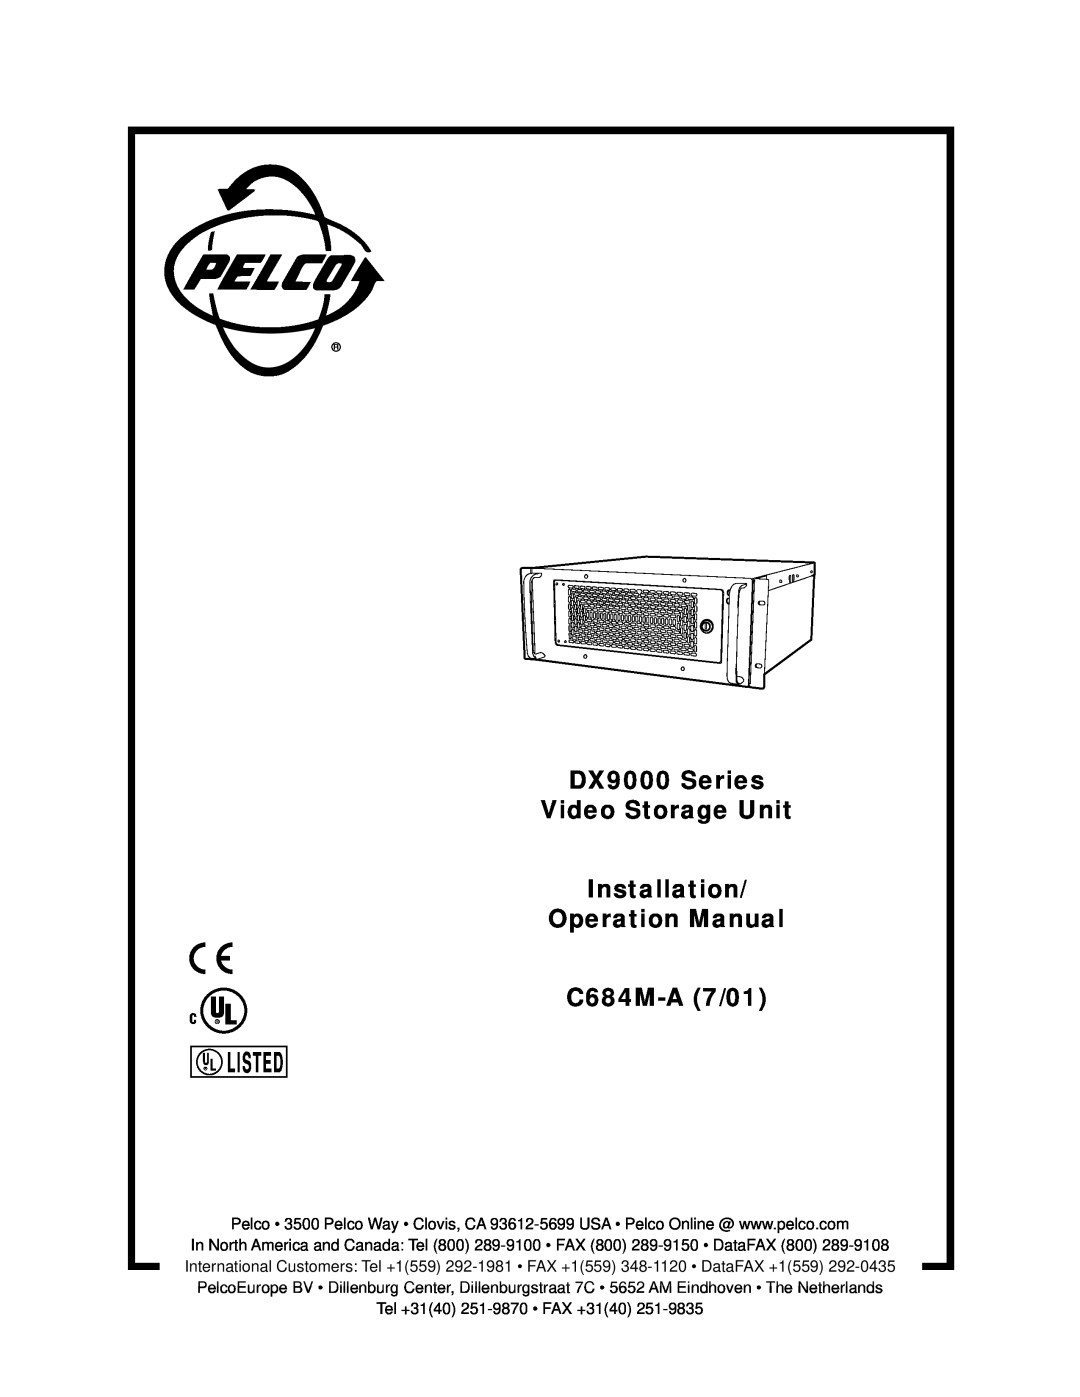 Pelco c684M-A operation manual Ul Listed, DX9000 Series Video Storage Unit Installation 